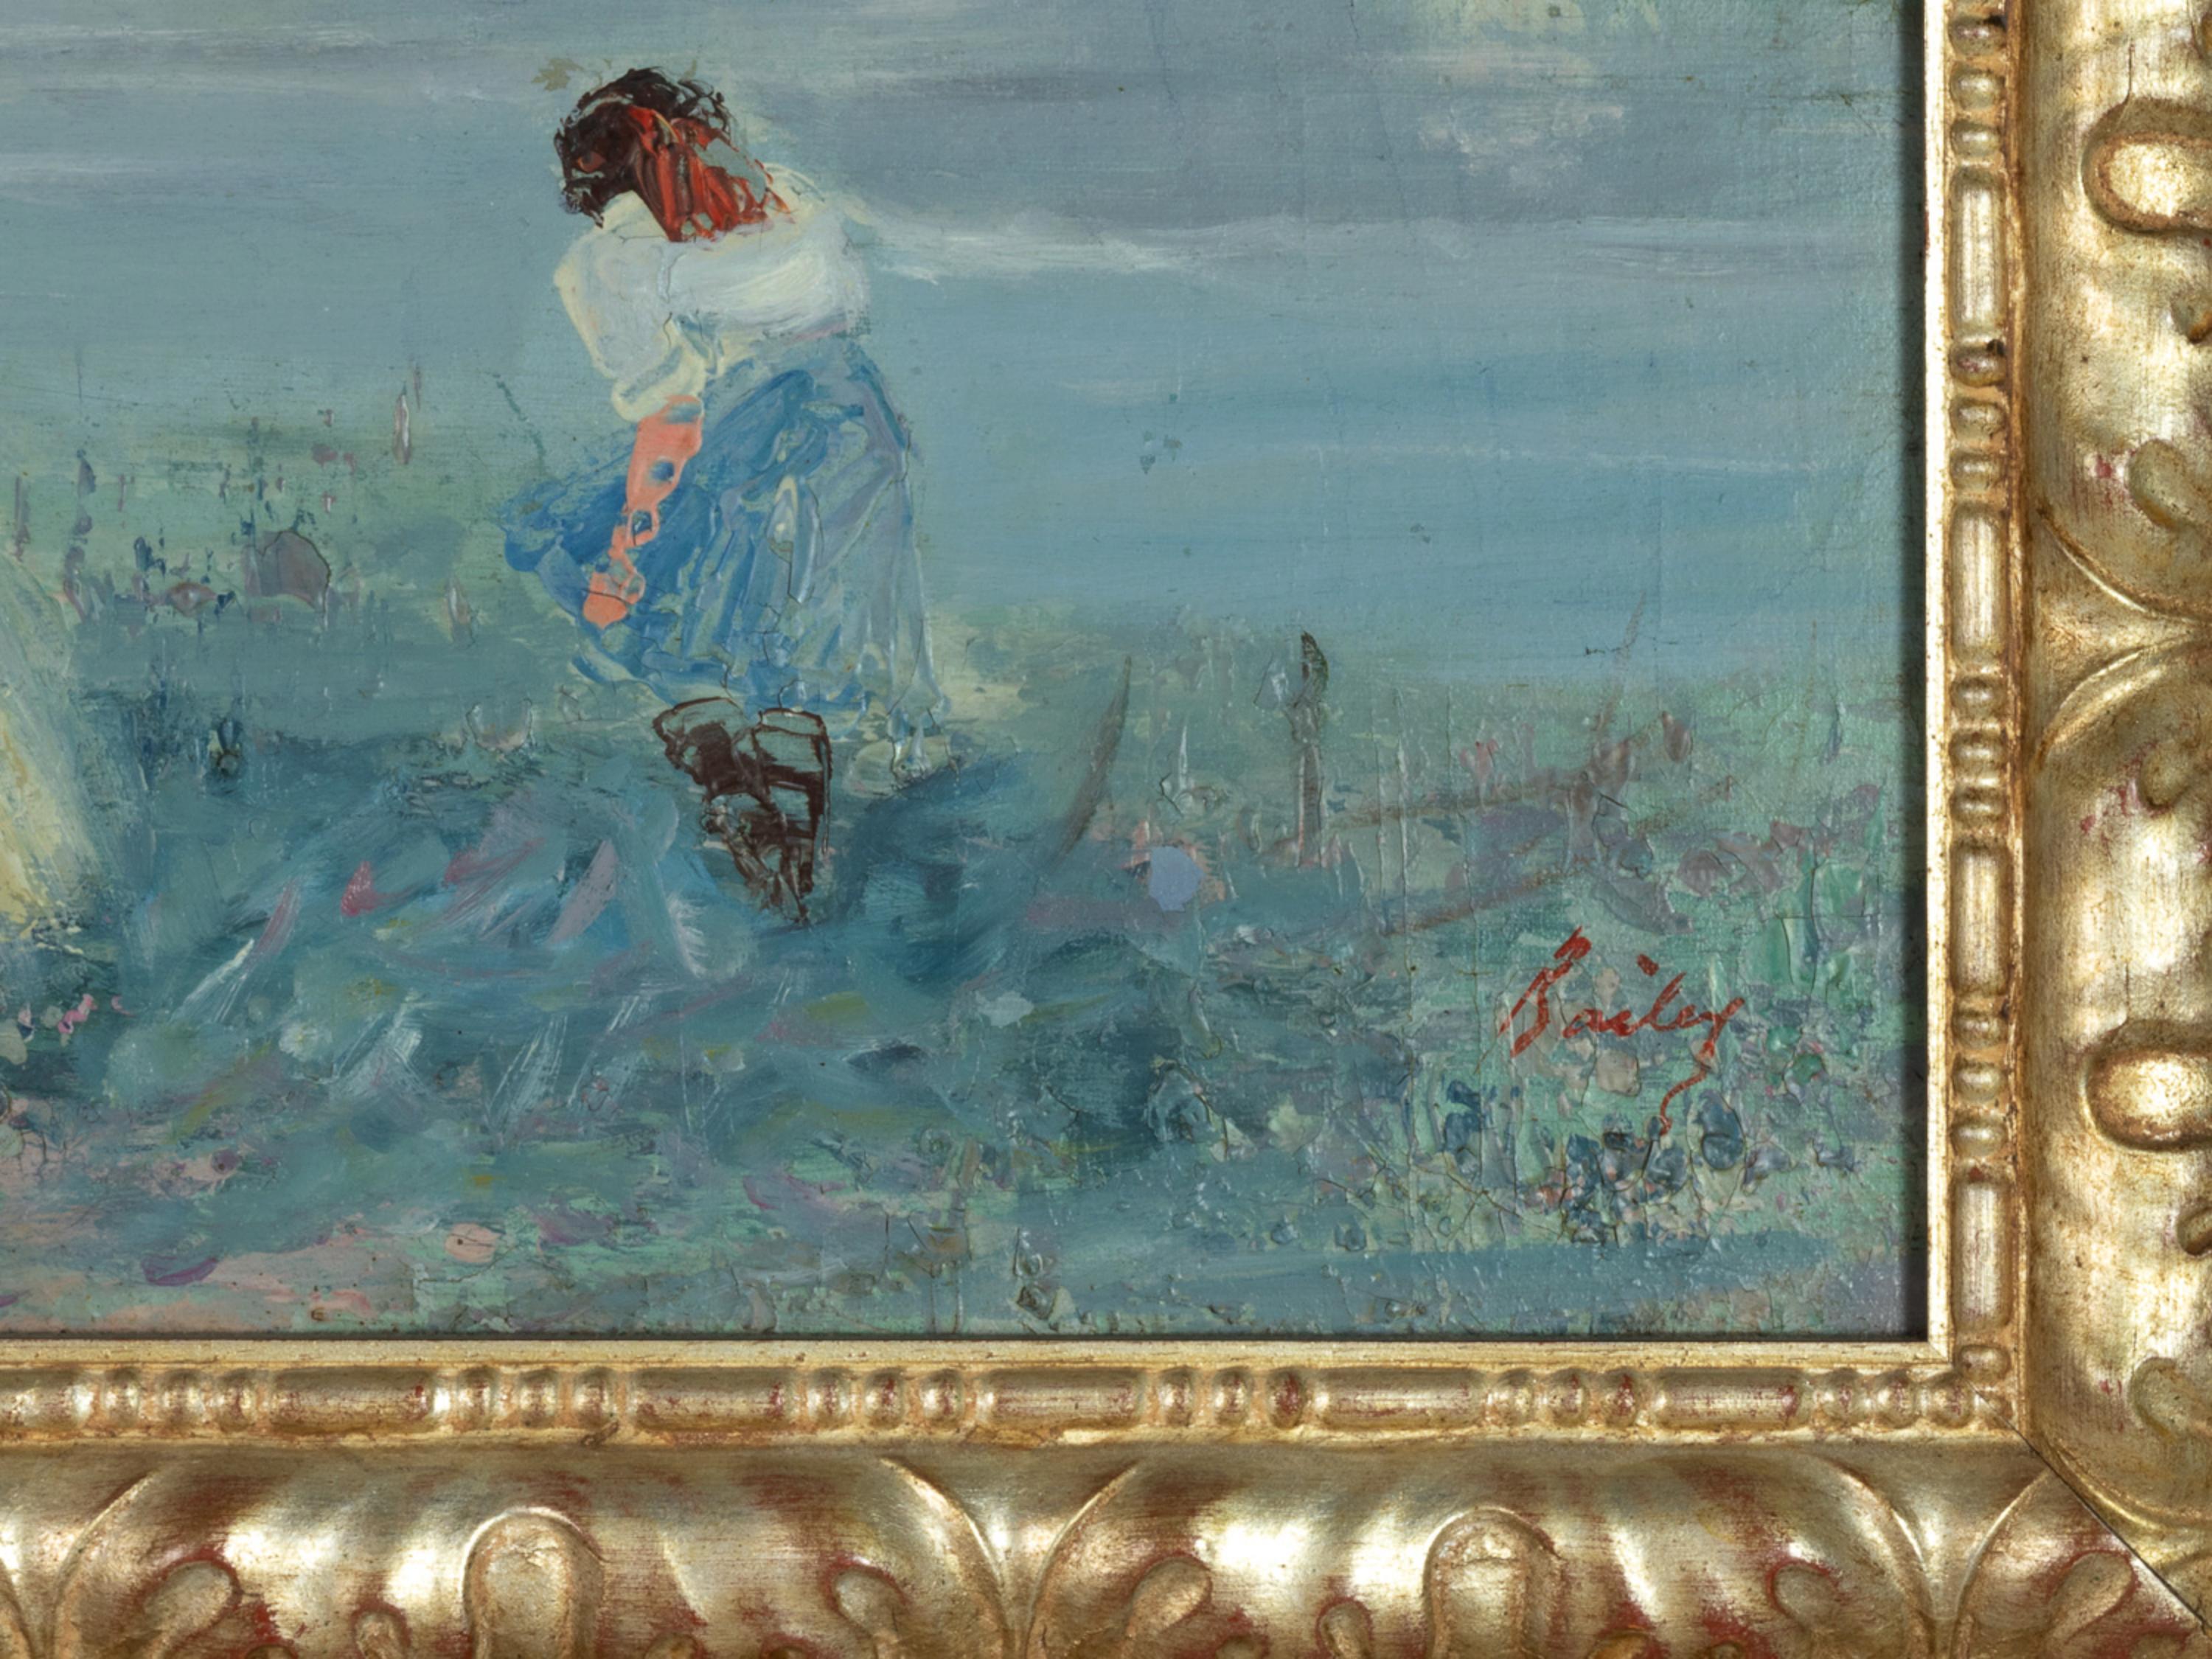 An early 20th Century Post Impressionist painting of a lady with children, set against the picturesque backdrop of the Argenteuil region near Paris, is depicted in a blue tonality. The work, signed 'Bailey' in the lower right corner, exudes a sense